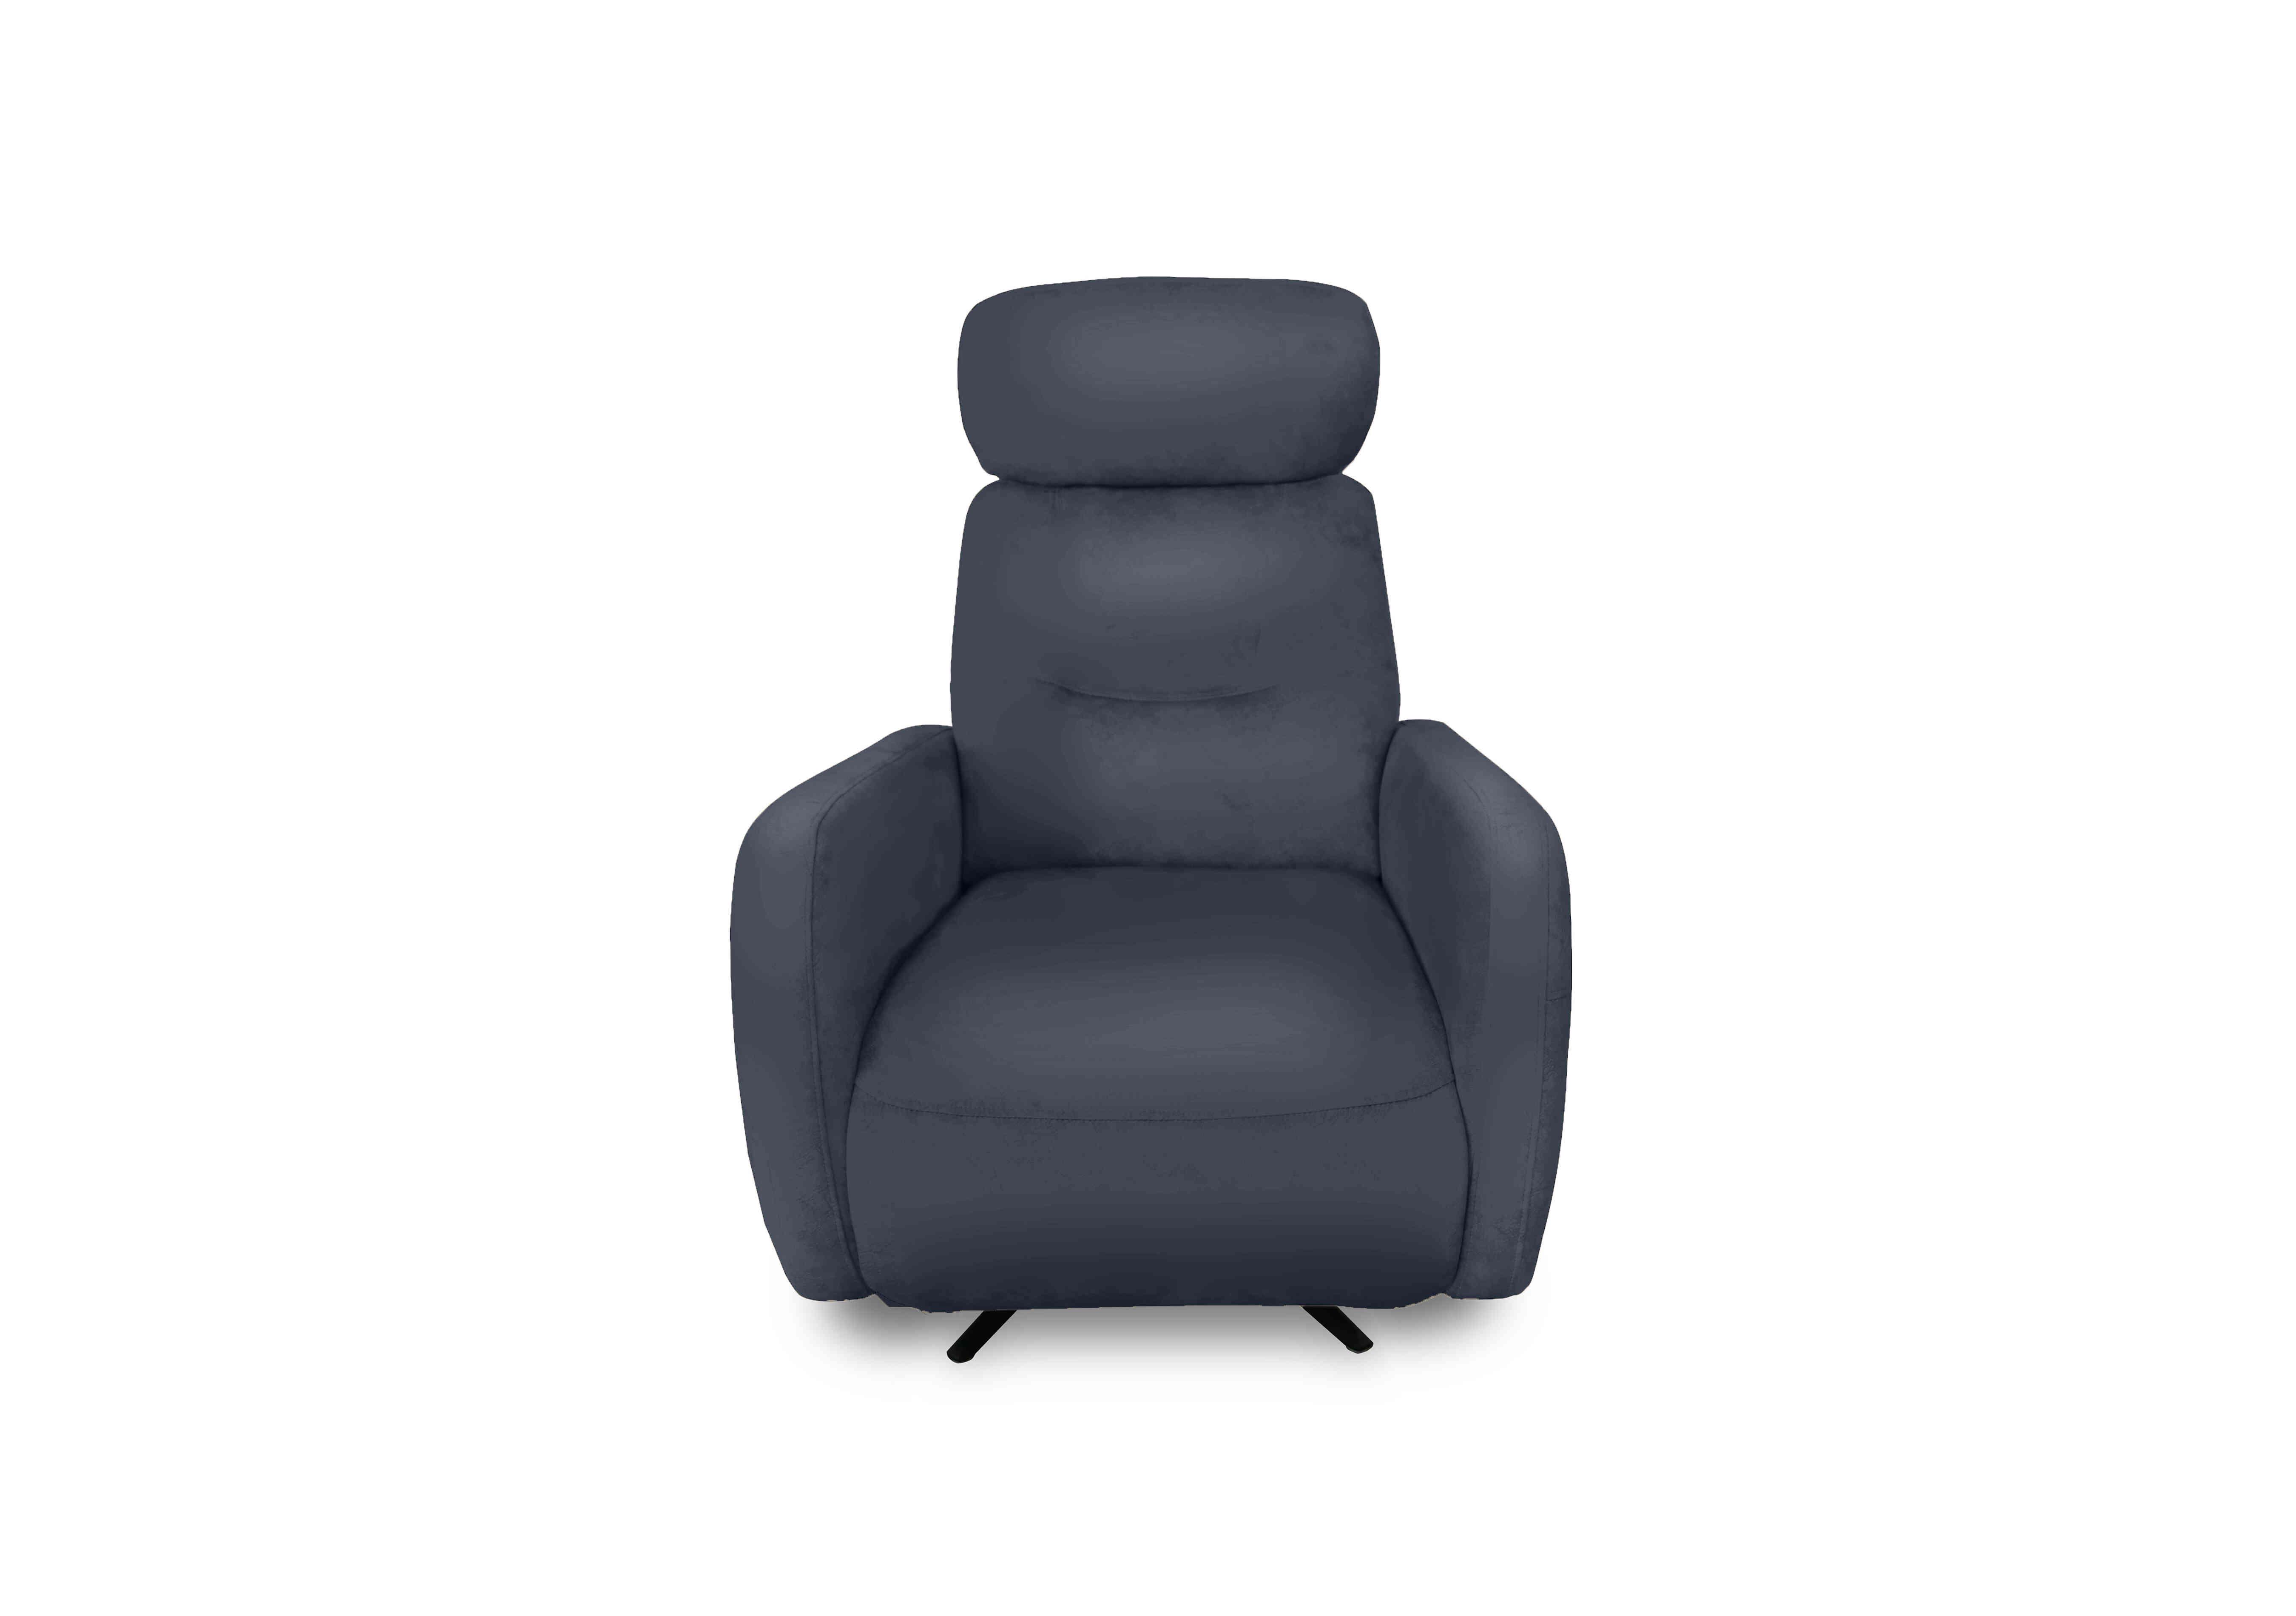 Designer Chair Collection Tokyo Leather Manual Recliner Swivel Chair in Bv-313e Ocean Blue on Furniture Village